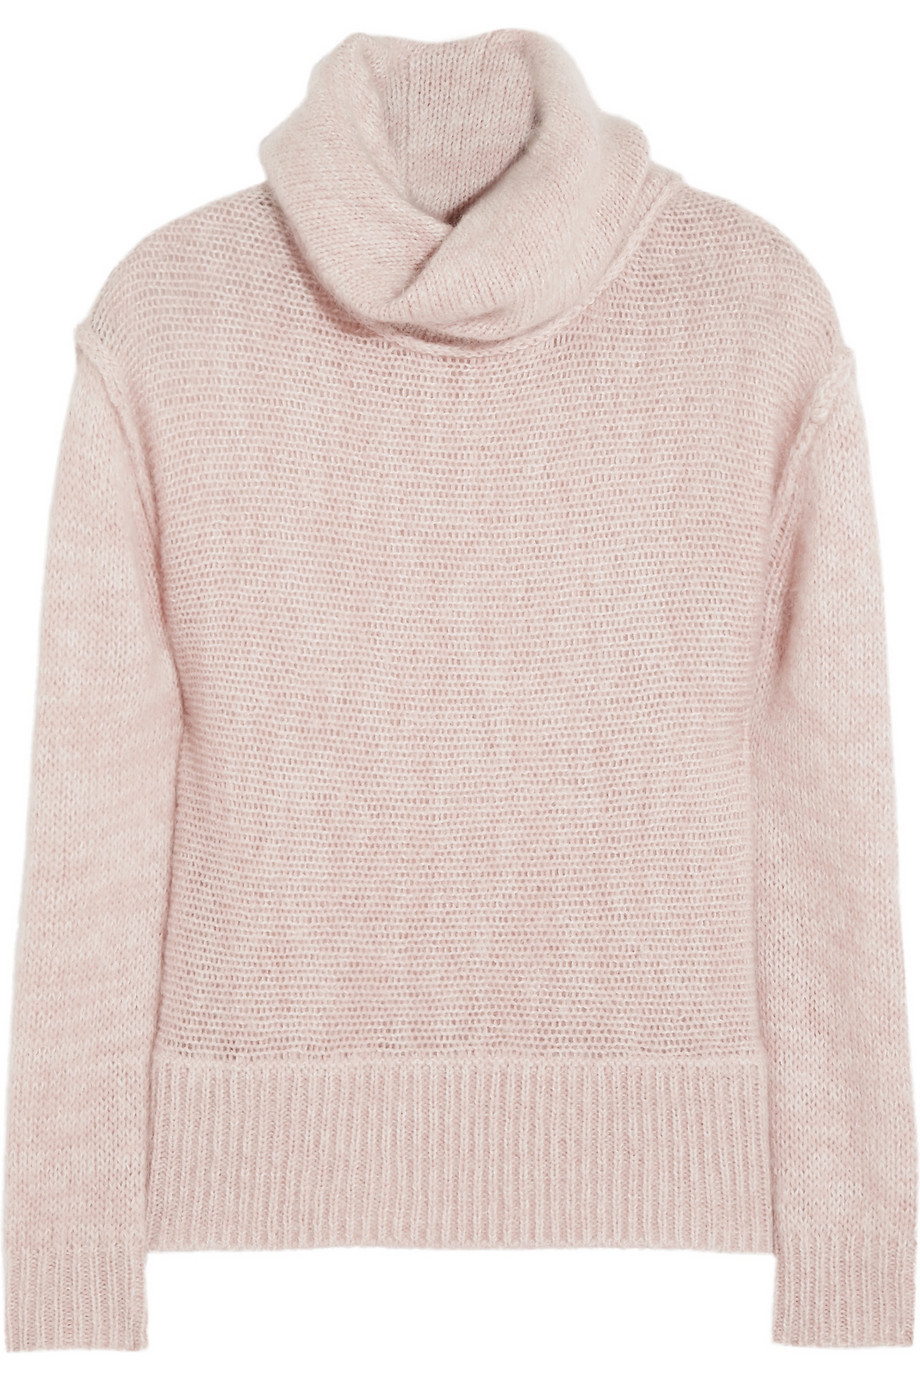 Duffy Knitted Turtleneck Sweater in Pink | Lyst